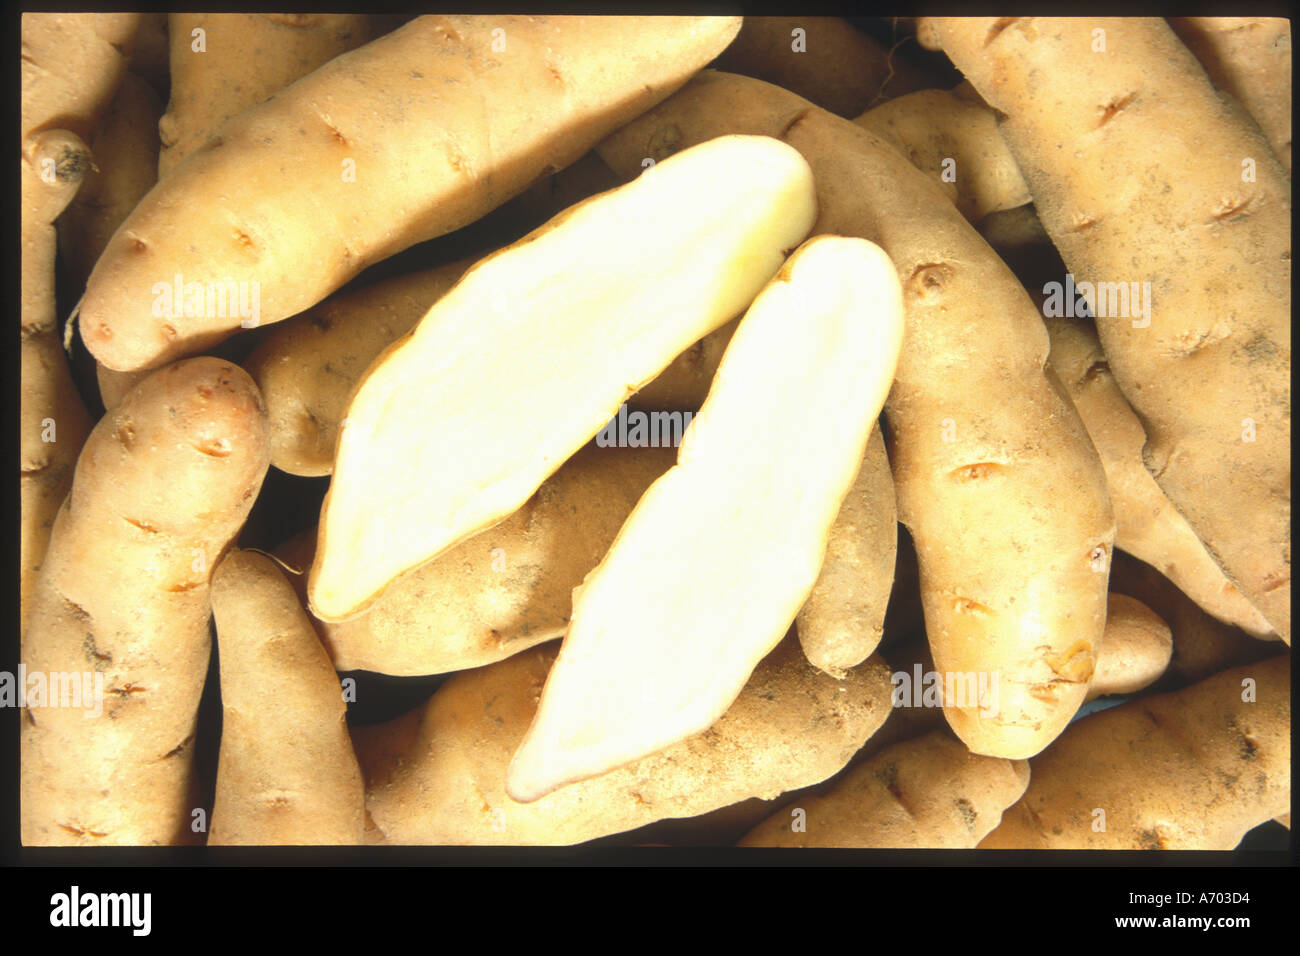 food vegetable potatoe potatoes special kind called Bamberger Hörnchen Hoernchen cultivated in Germany gourmet Stock Photo